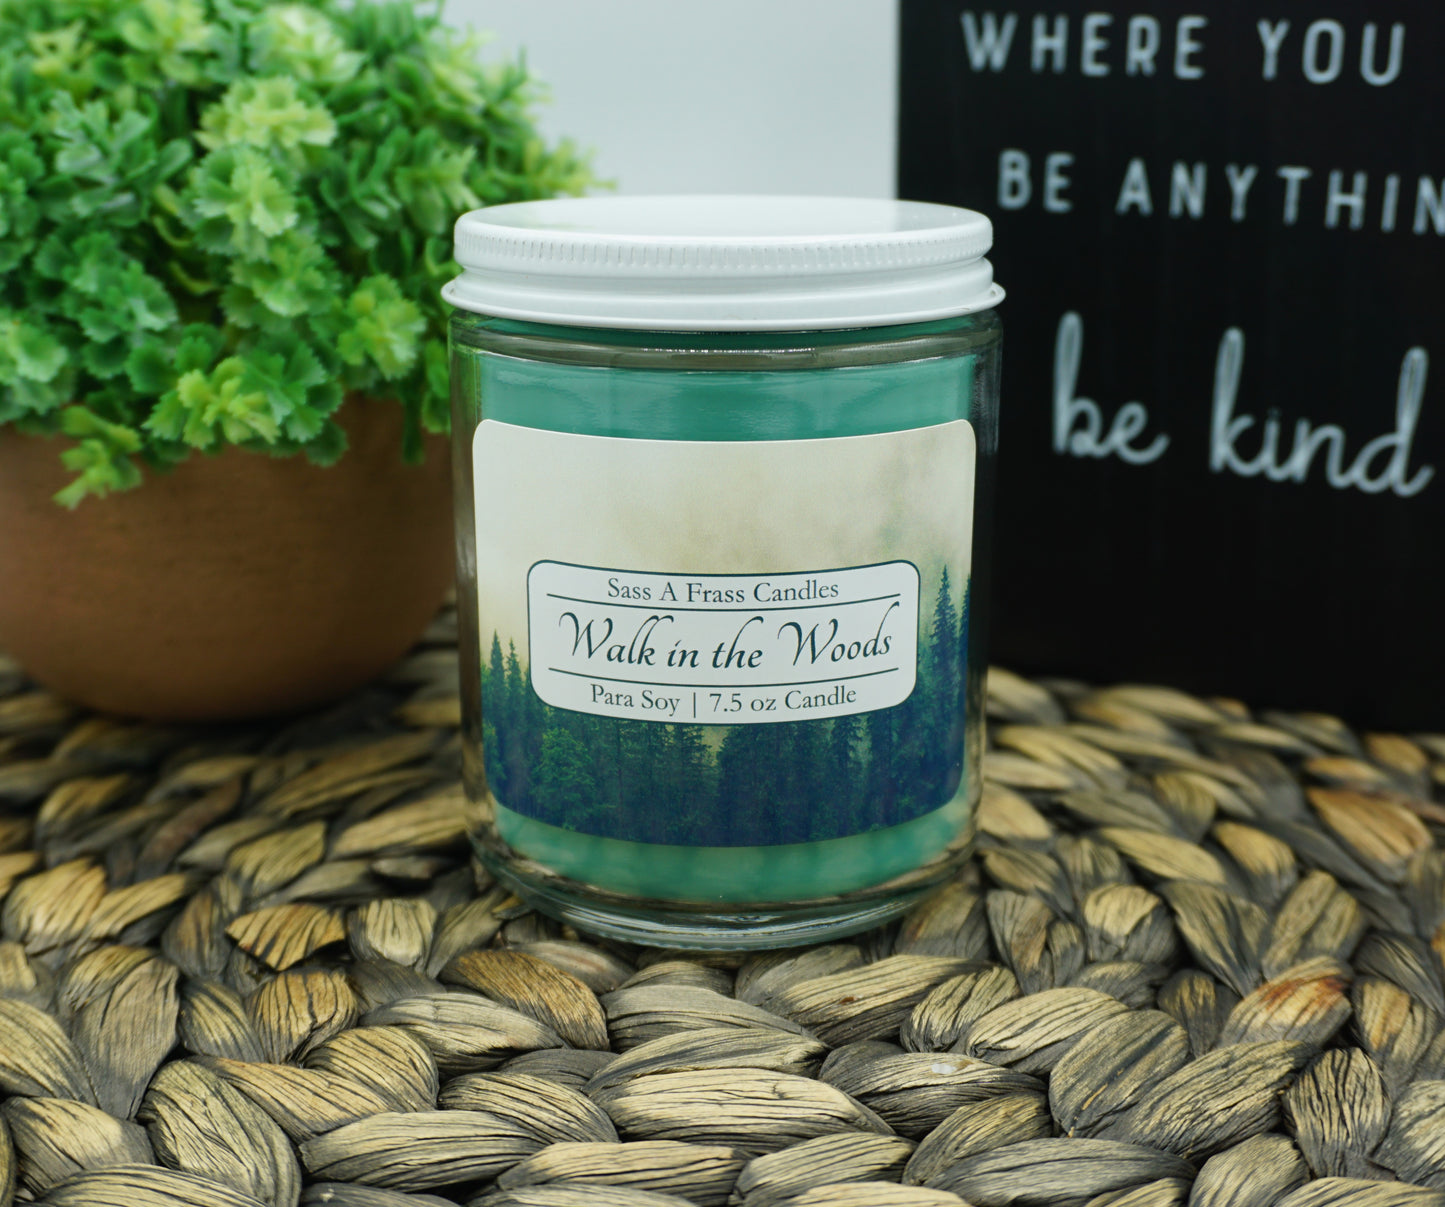 Walk in the Woods 7.5 oz Candle